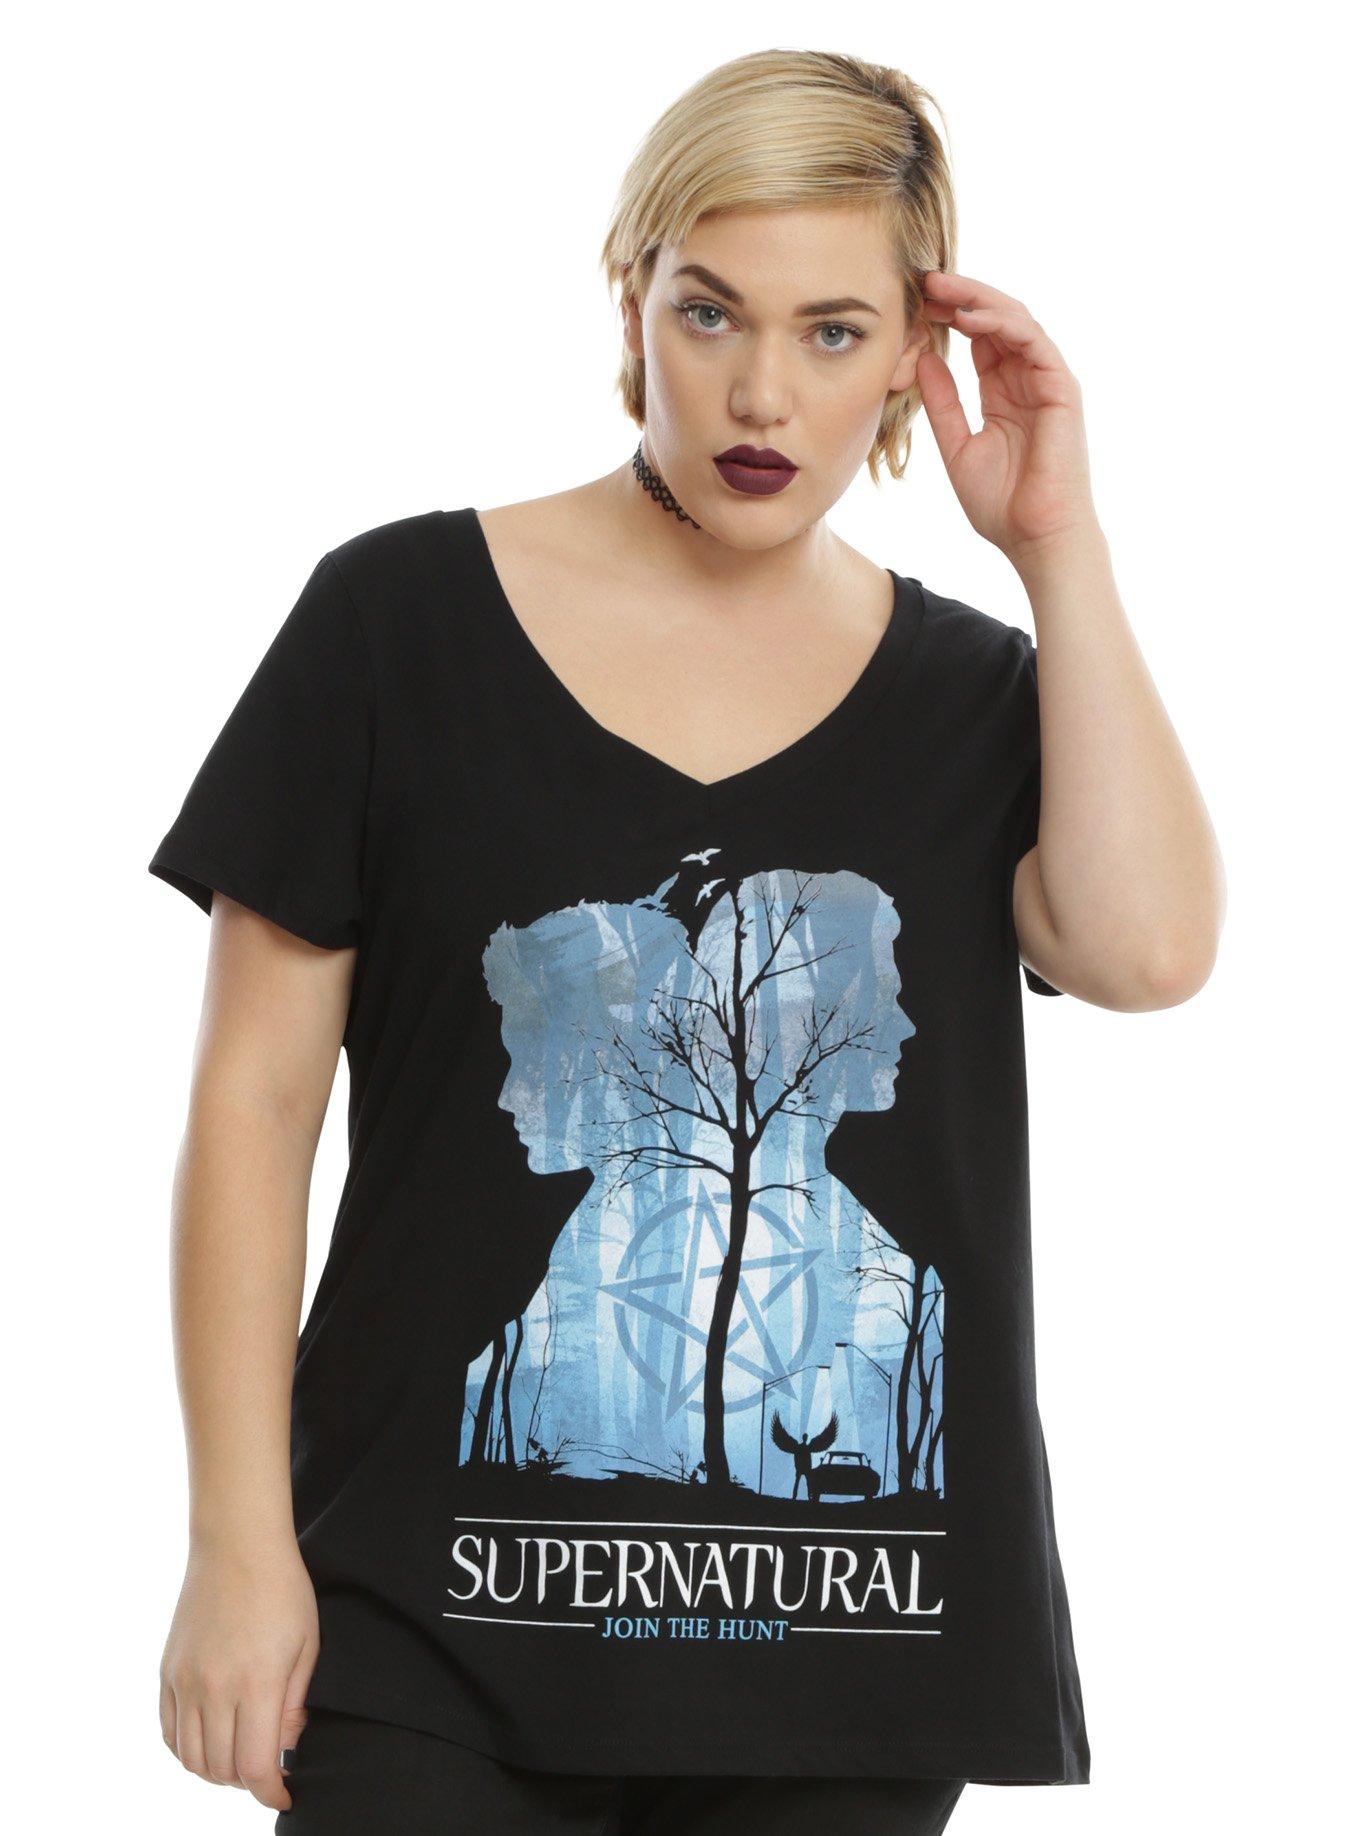 Supernatural Winchester Brothers Silhouette Girls T-Shirt Plus Size, BLACK, hi-res